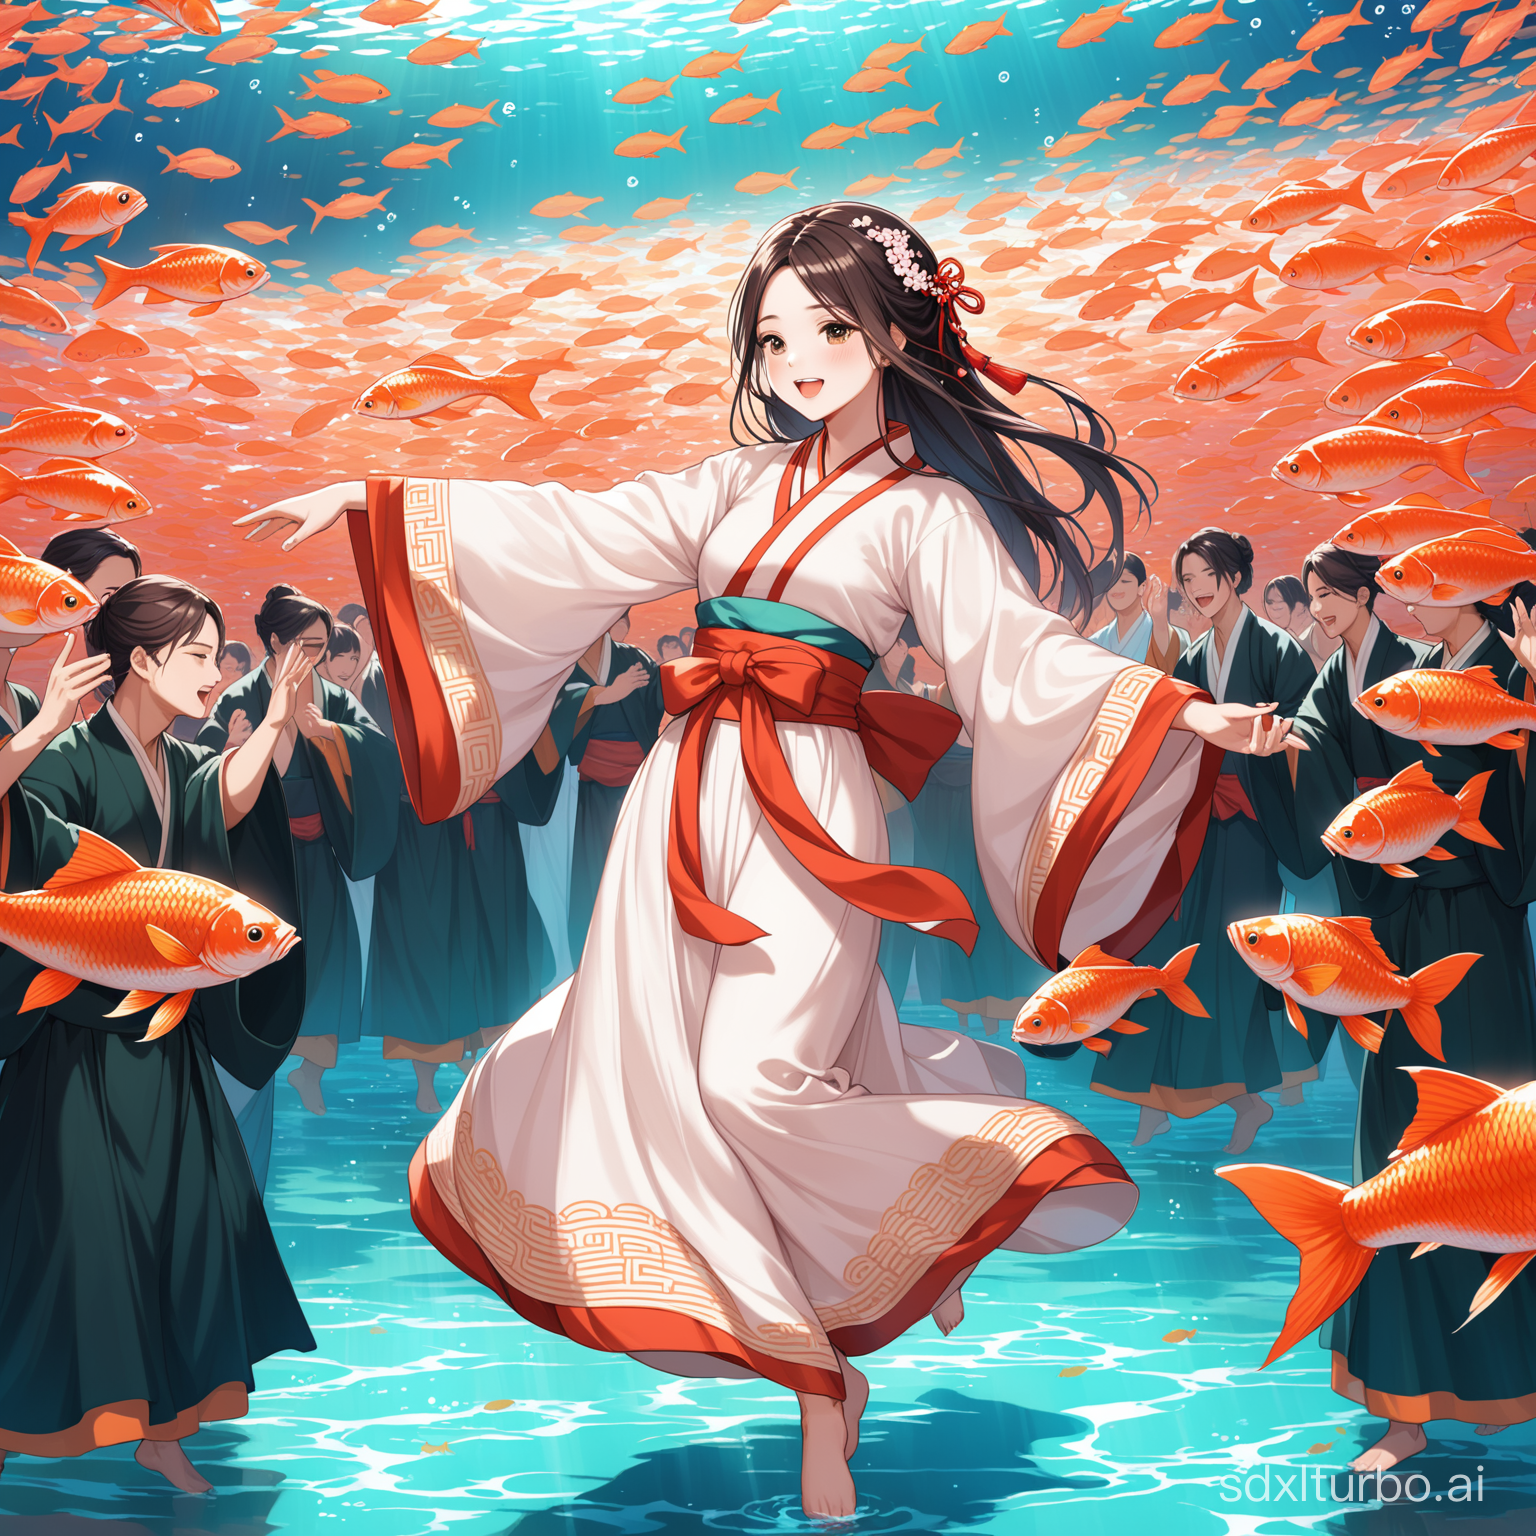 A girl in Hanfu is dancing under the crowd of fish